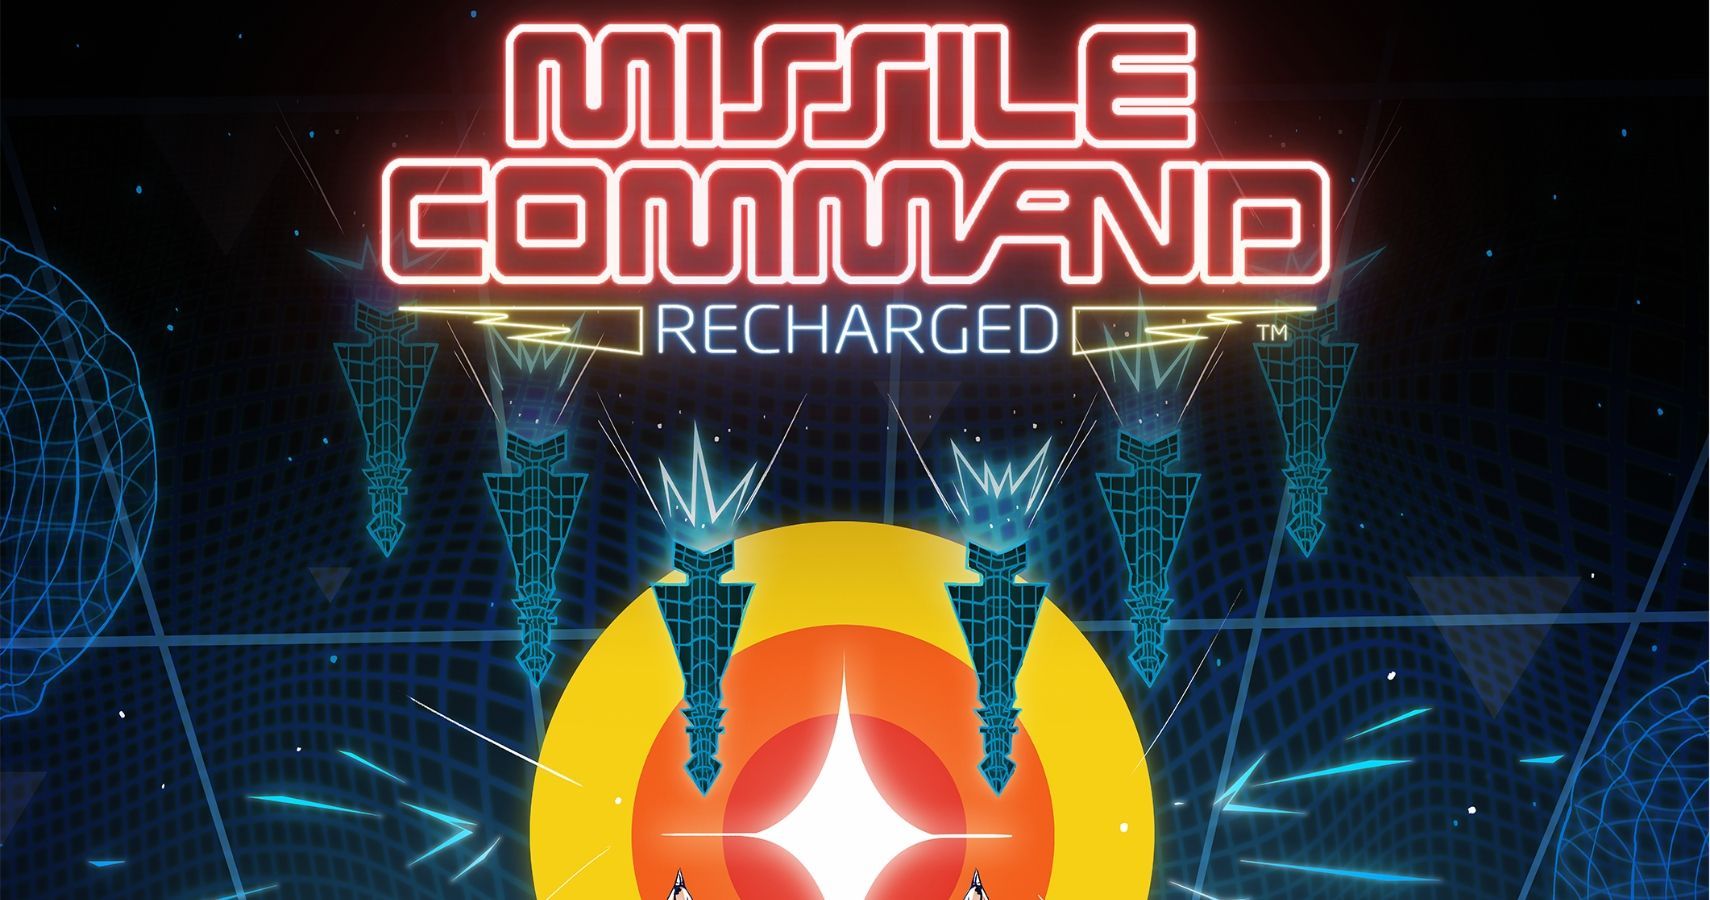 Atari Missile Command Recharged feature image